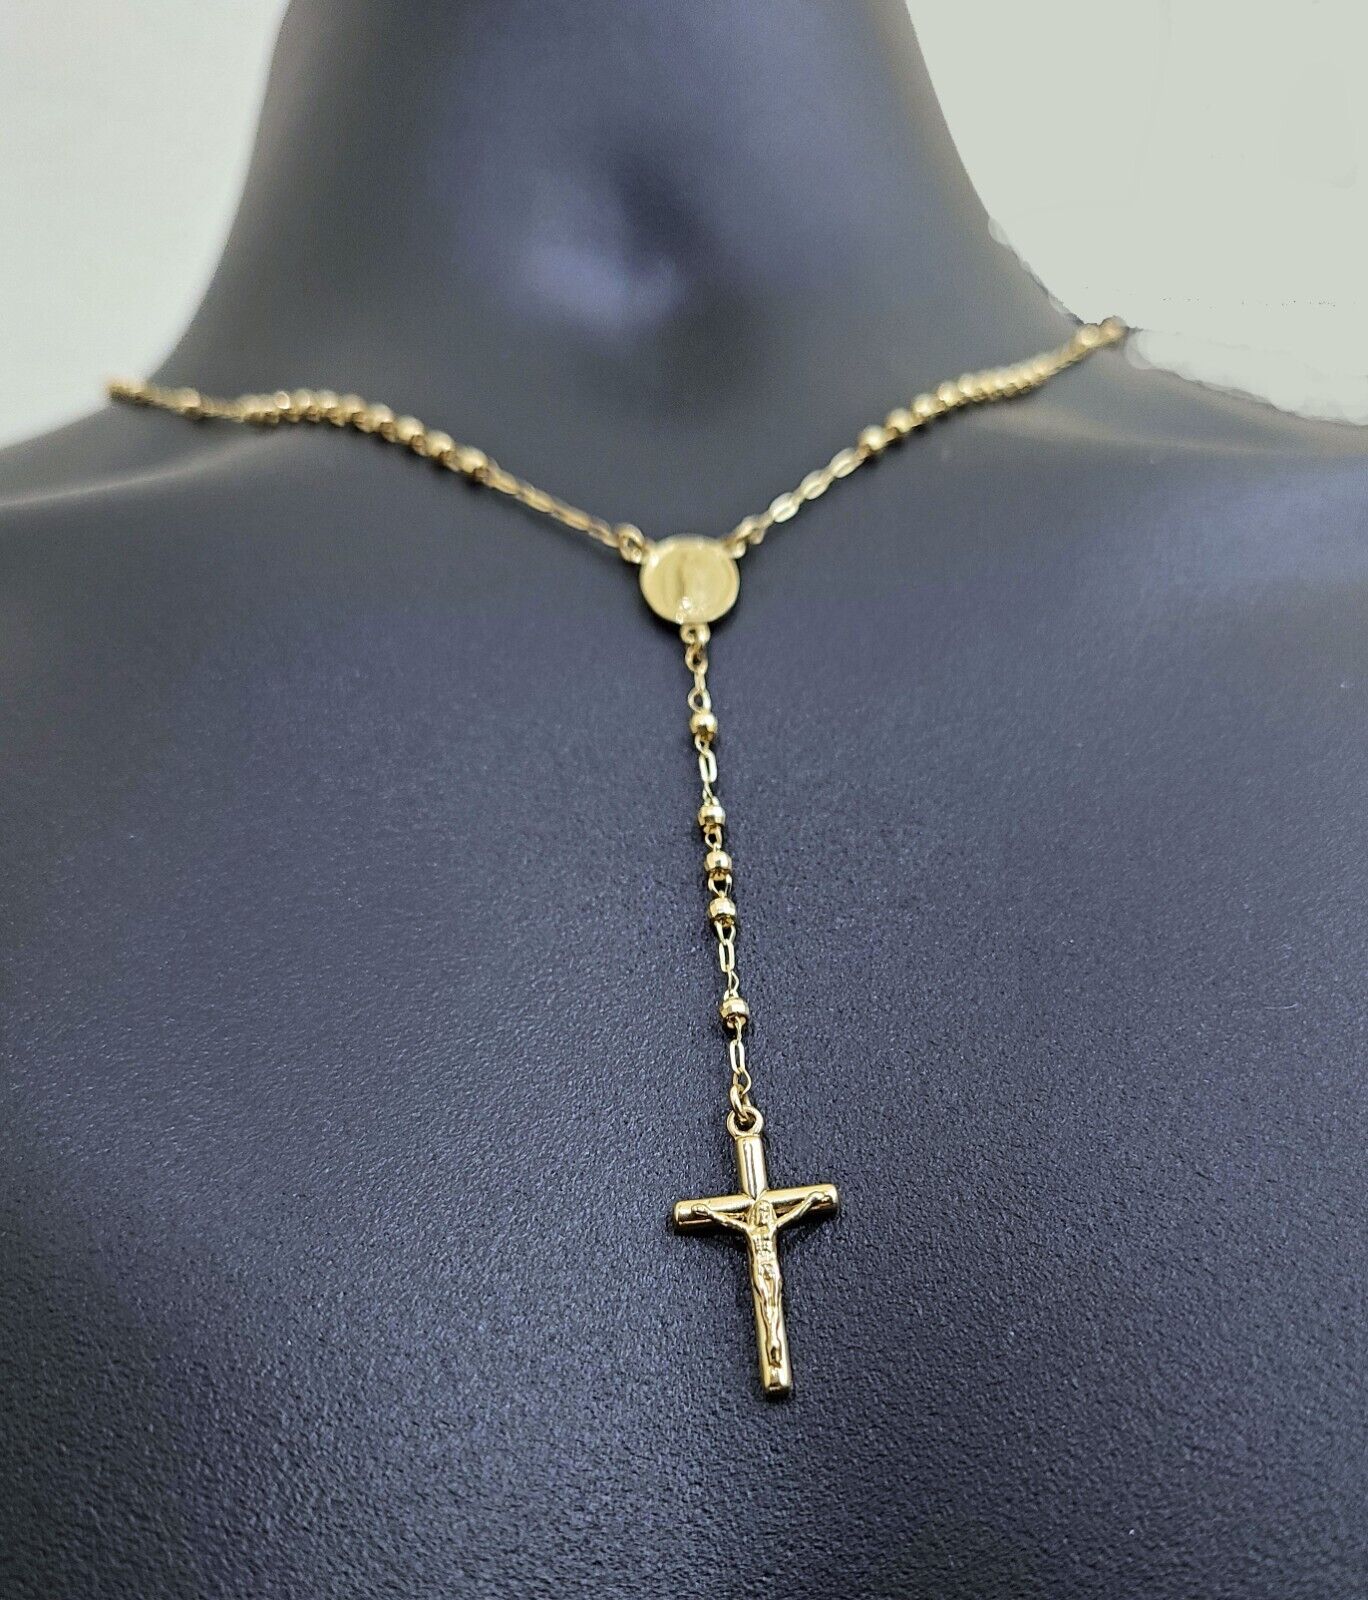 Ladies' Beaded Rosary Necklace in 10K Gold - 18